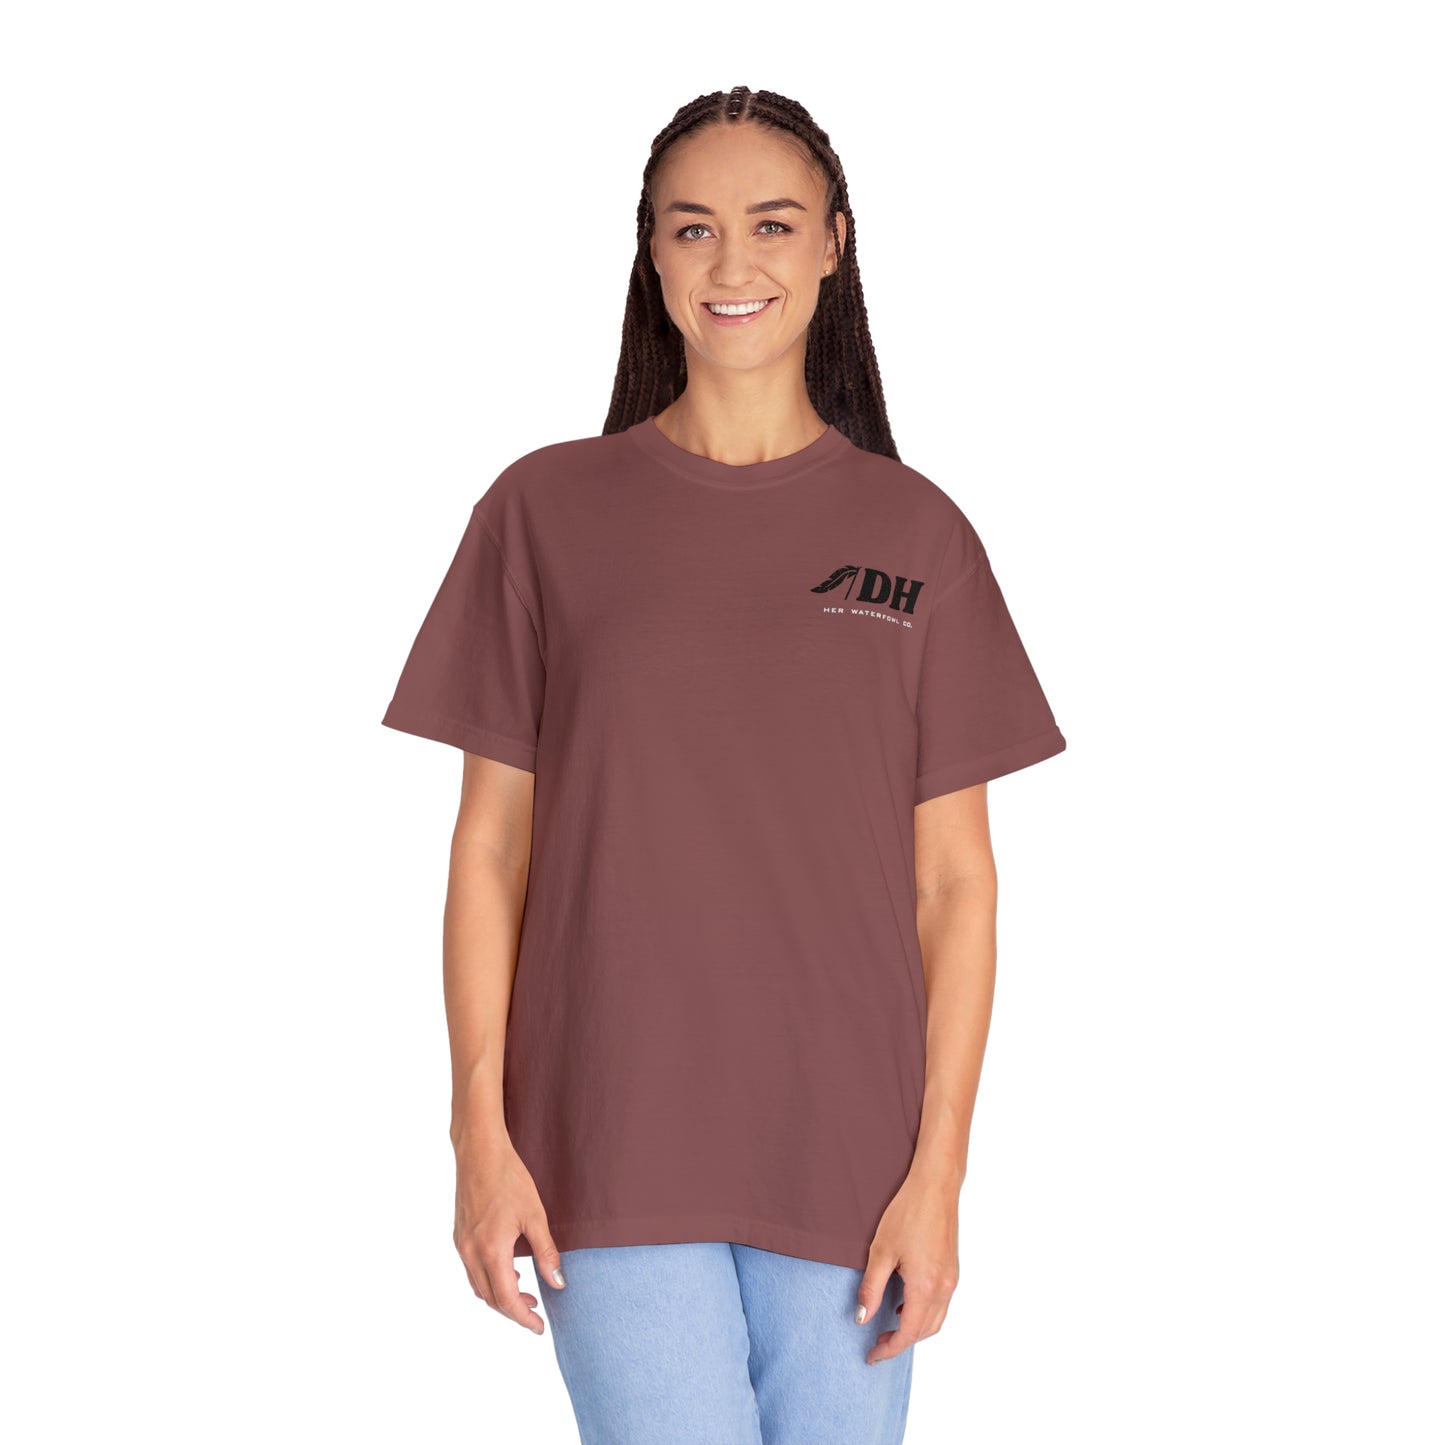 Raise 'Em Right Tee (New Fall Colors)